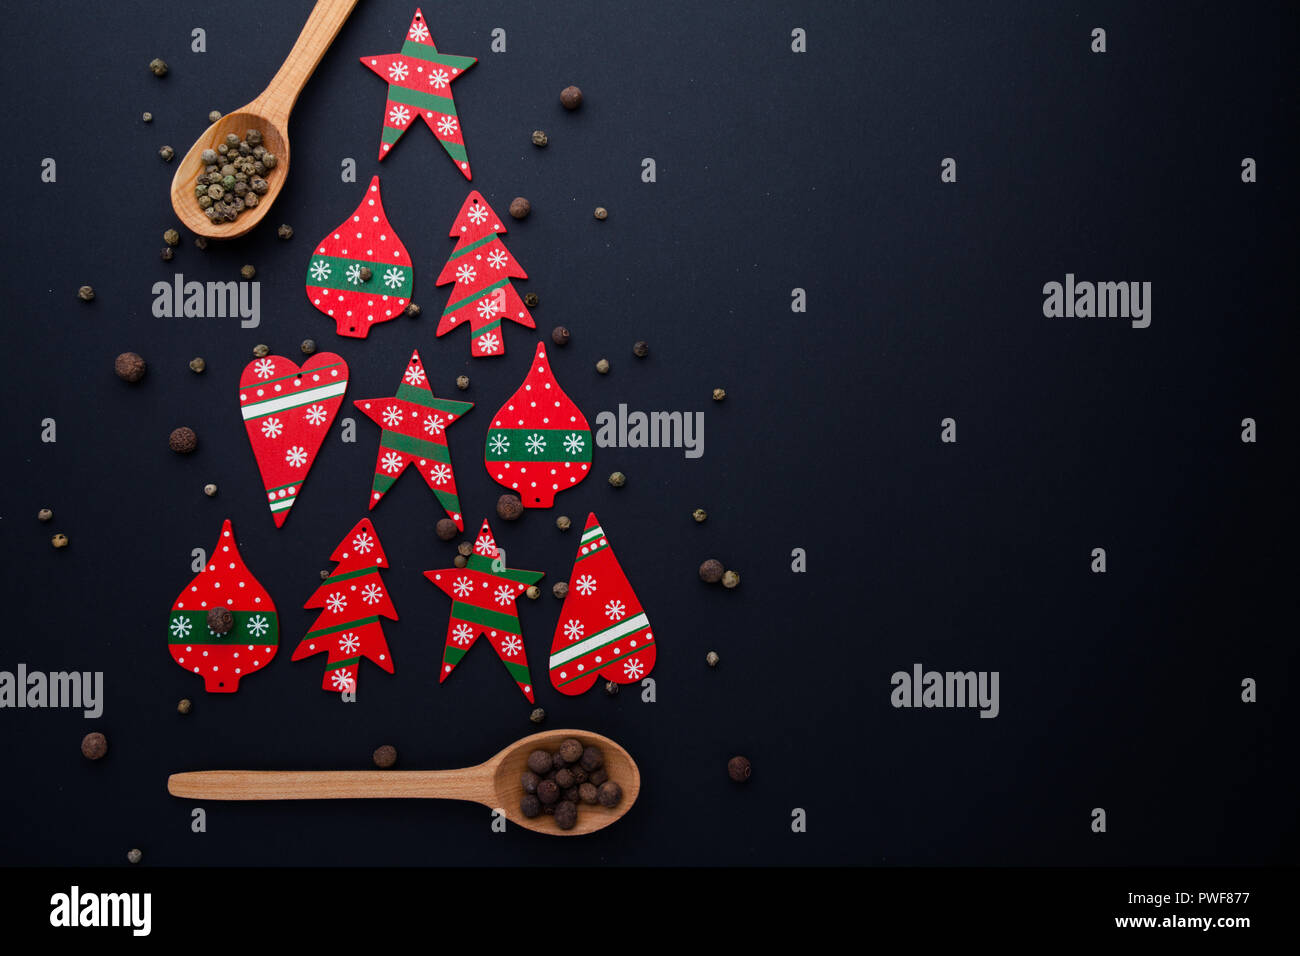 Christmas tree made from red candies and wooden spoons Stock Photo